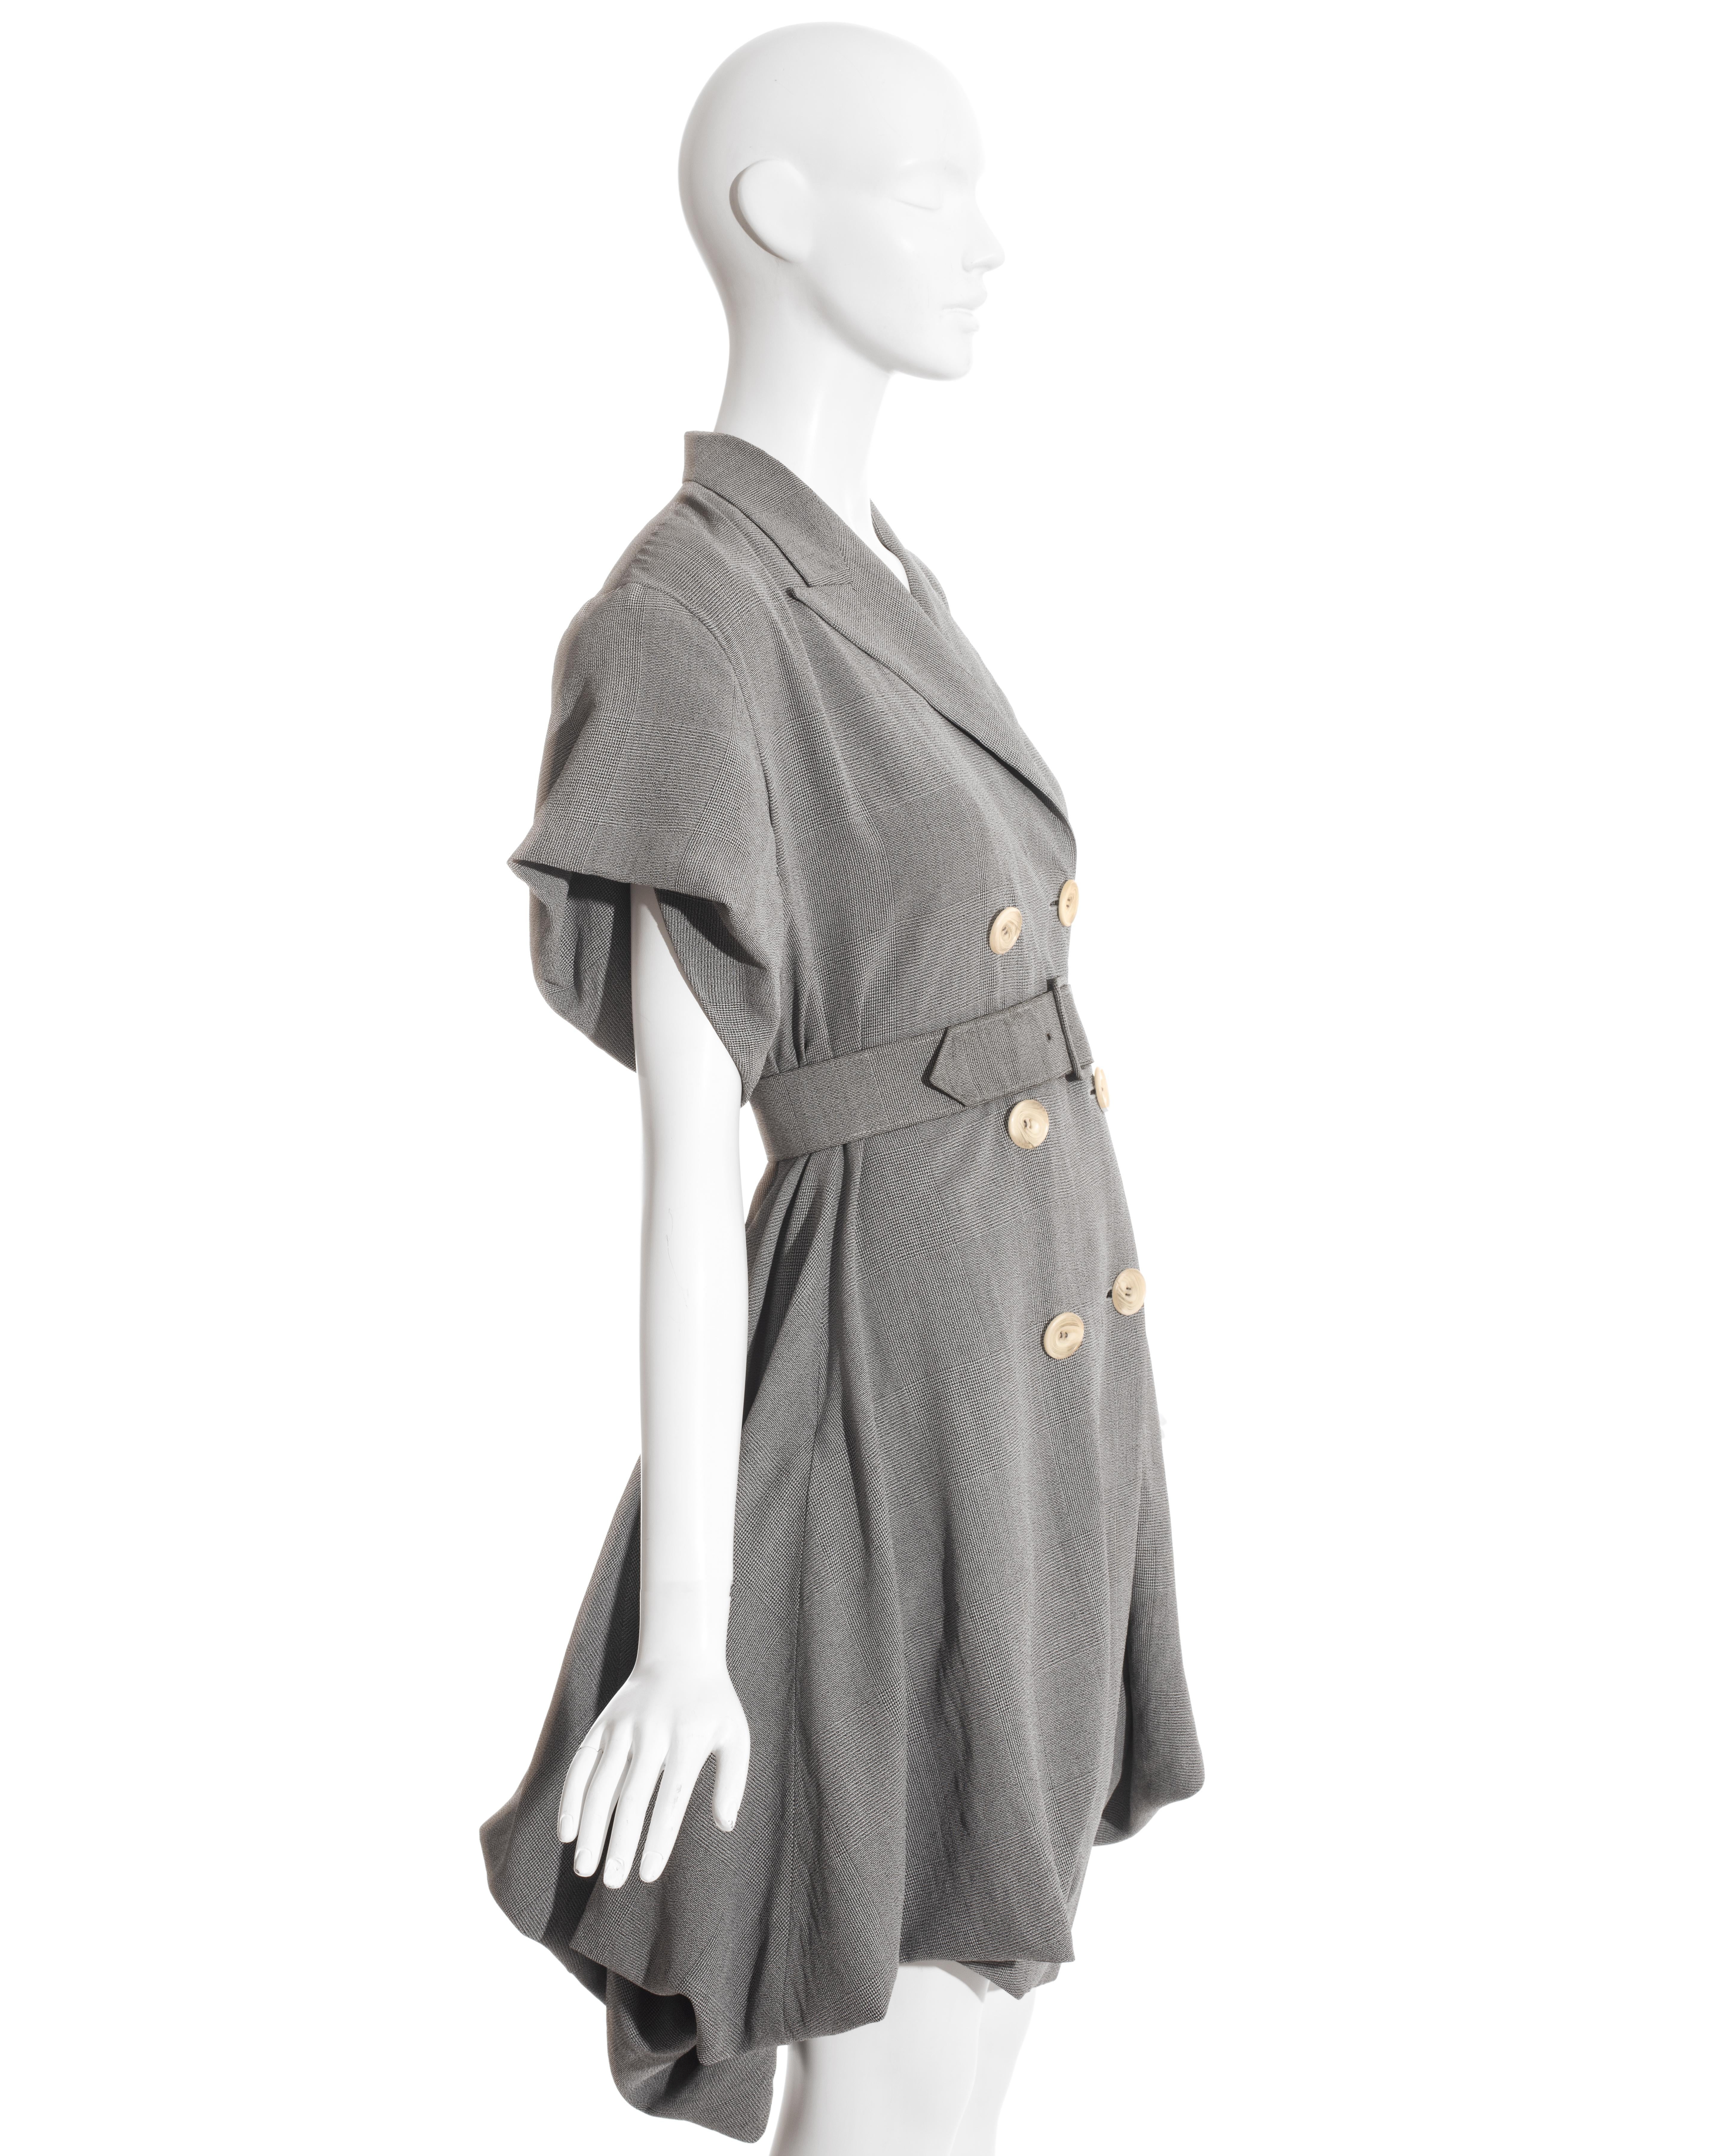 John Galliano grey rayon checked Blanche Dubois bustled coat dress, ss 1988 In Excellent Condition For Sale In London, GB